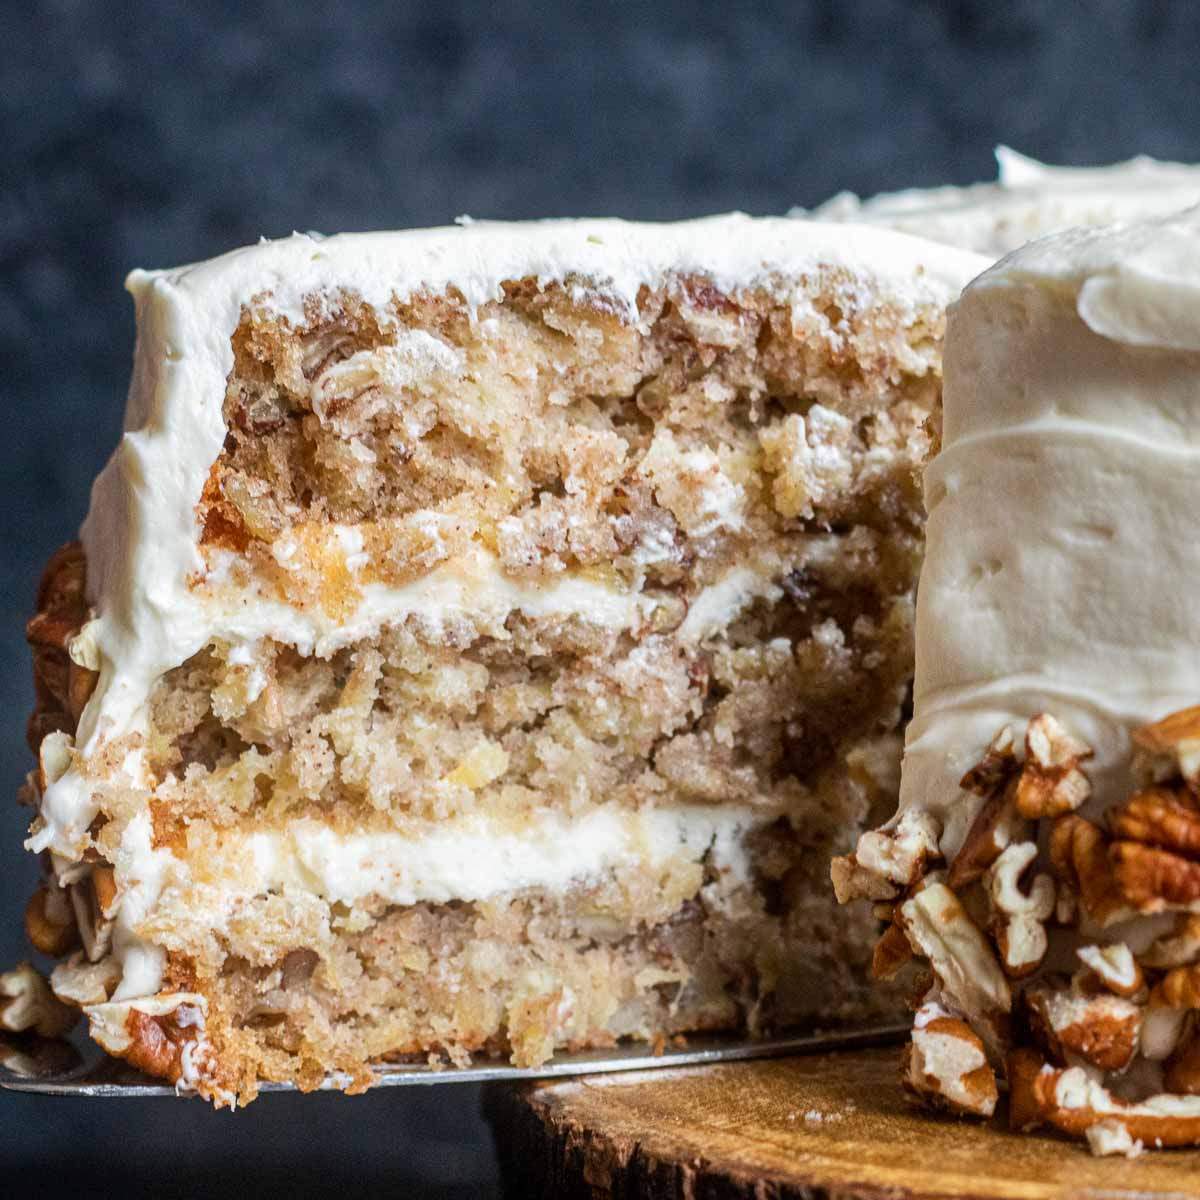 slice of hummingbird cake being removed from a full cake